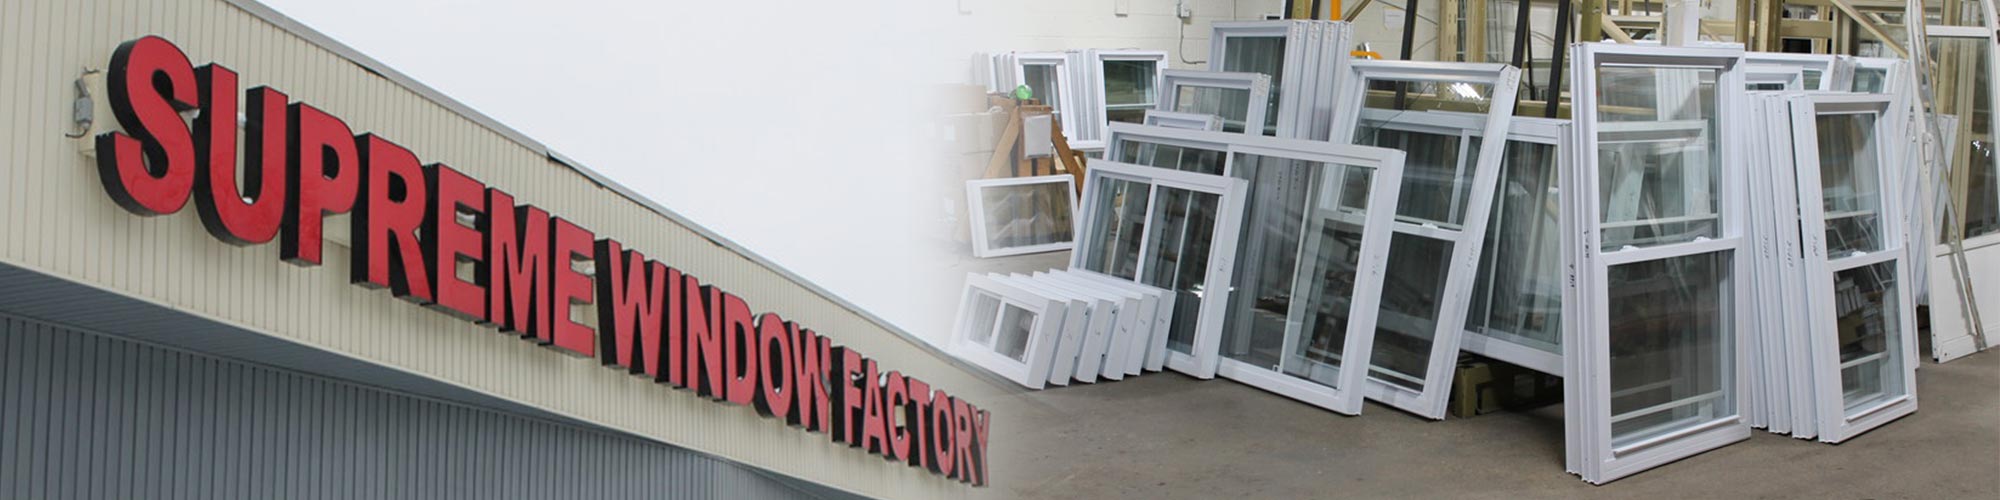 Home Supreme Window Factory Products